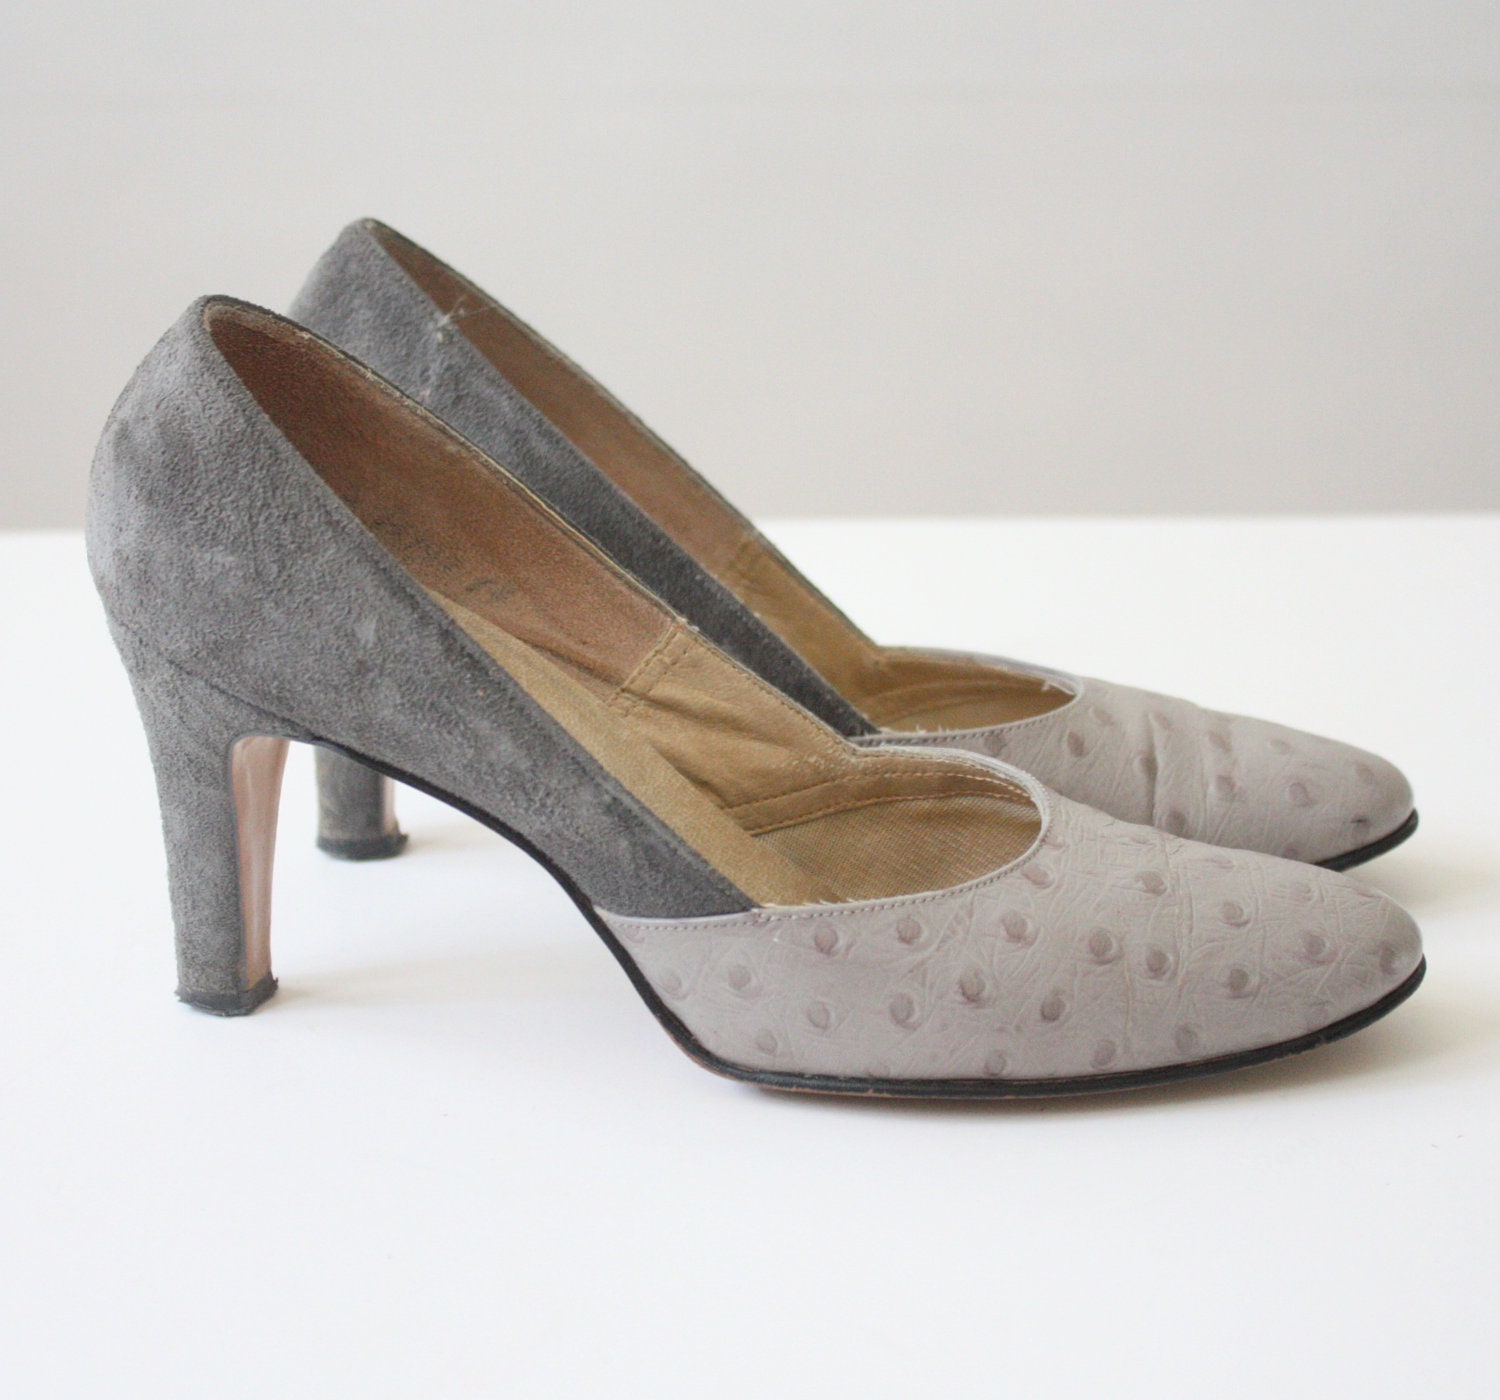 vintage 1950's suede and ostrich pumps size 7 1/2